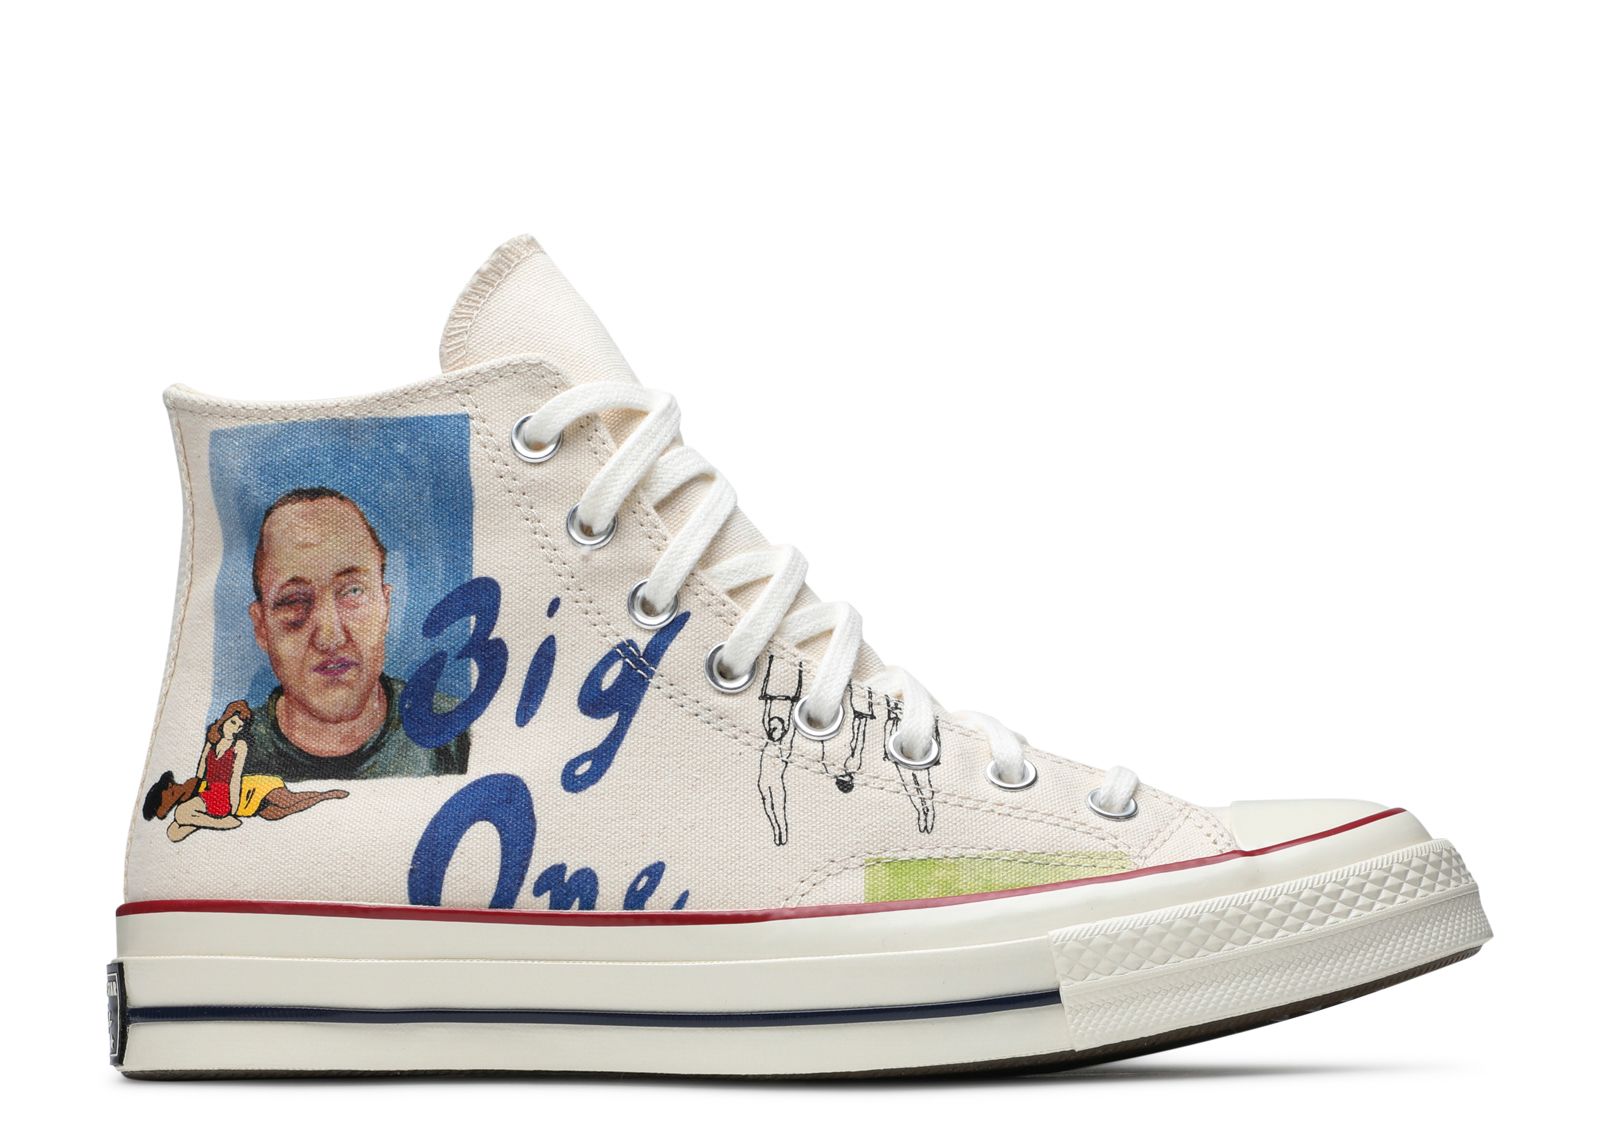 Кроссовки Converse Spencer Mcmullen X Chuck Taylor All Star 70 High 'People Print', белый